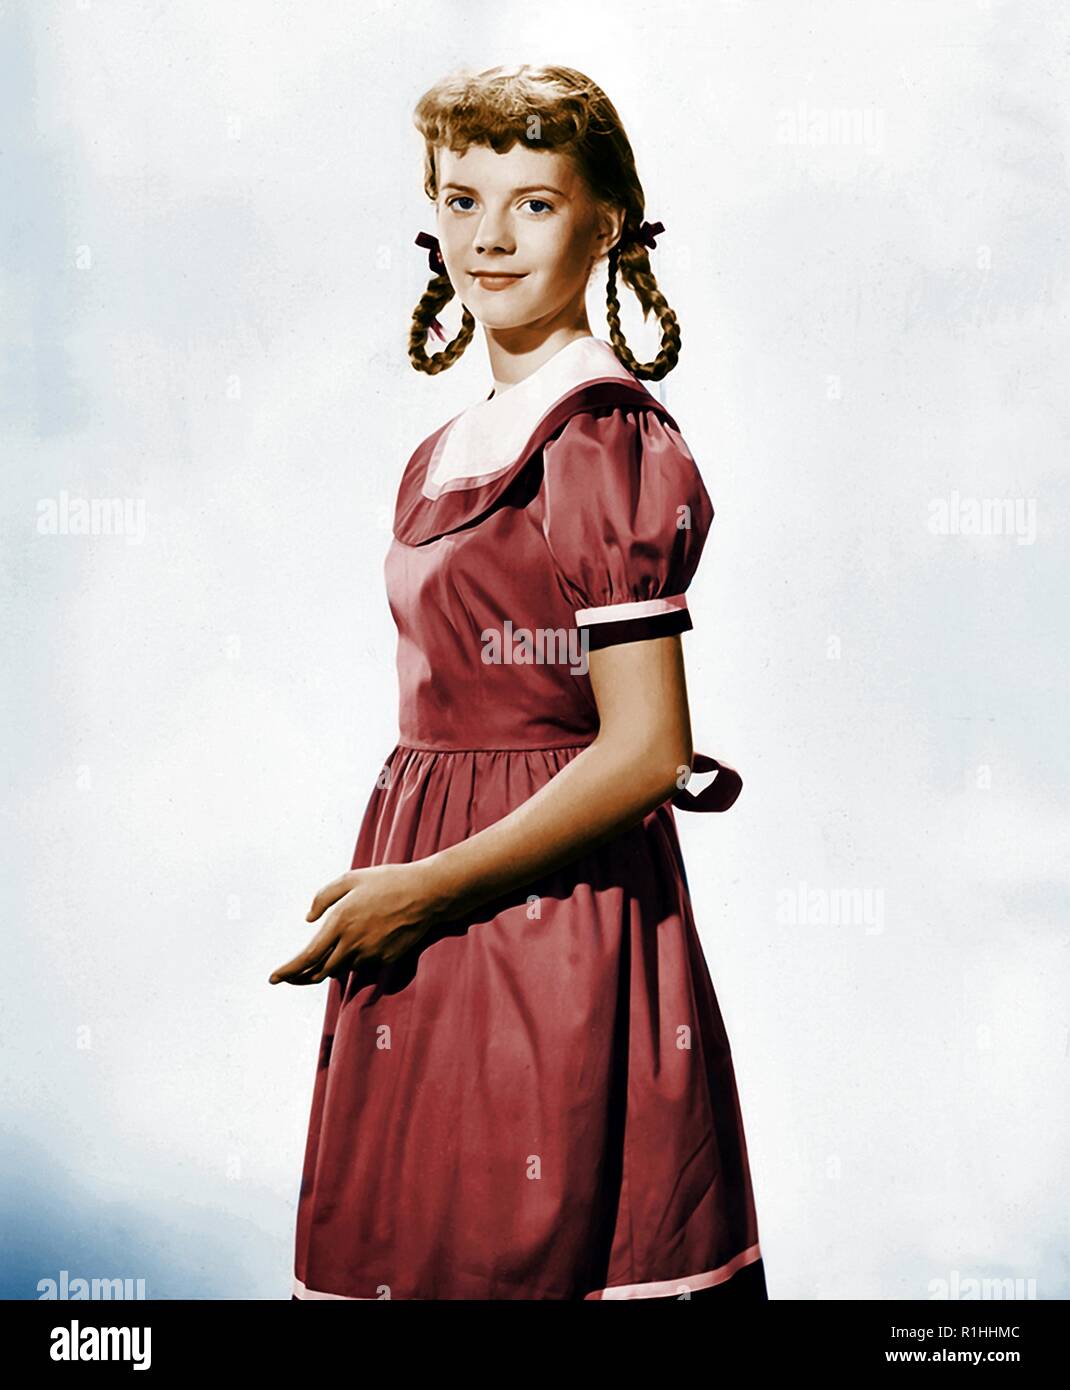 Wood began acting in films at the age of four and, at age eight, was given a co-starring role with Maureen O'Hara in the 1947 classic Christmas film Miracle on 34th Street.[As a teenager, her performance in Rebel Without a Cause (1955) earned her a nomination for the Academy Award for Best Supporting Actress. She starred in the musical films West Side Story (1961) and Gypsy (1962), and received Academy Award for Best Actress nominations for her performances in Splendor in the Grass (1961) and Love with the Proper Stranger (1963). Her career continued with films such as Bob & Carol & Ted & Alic Stock Photo